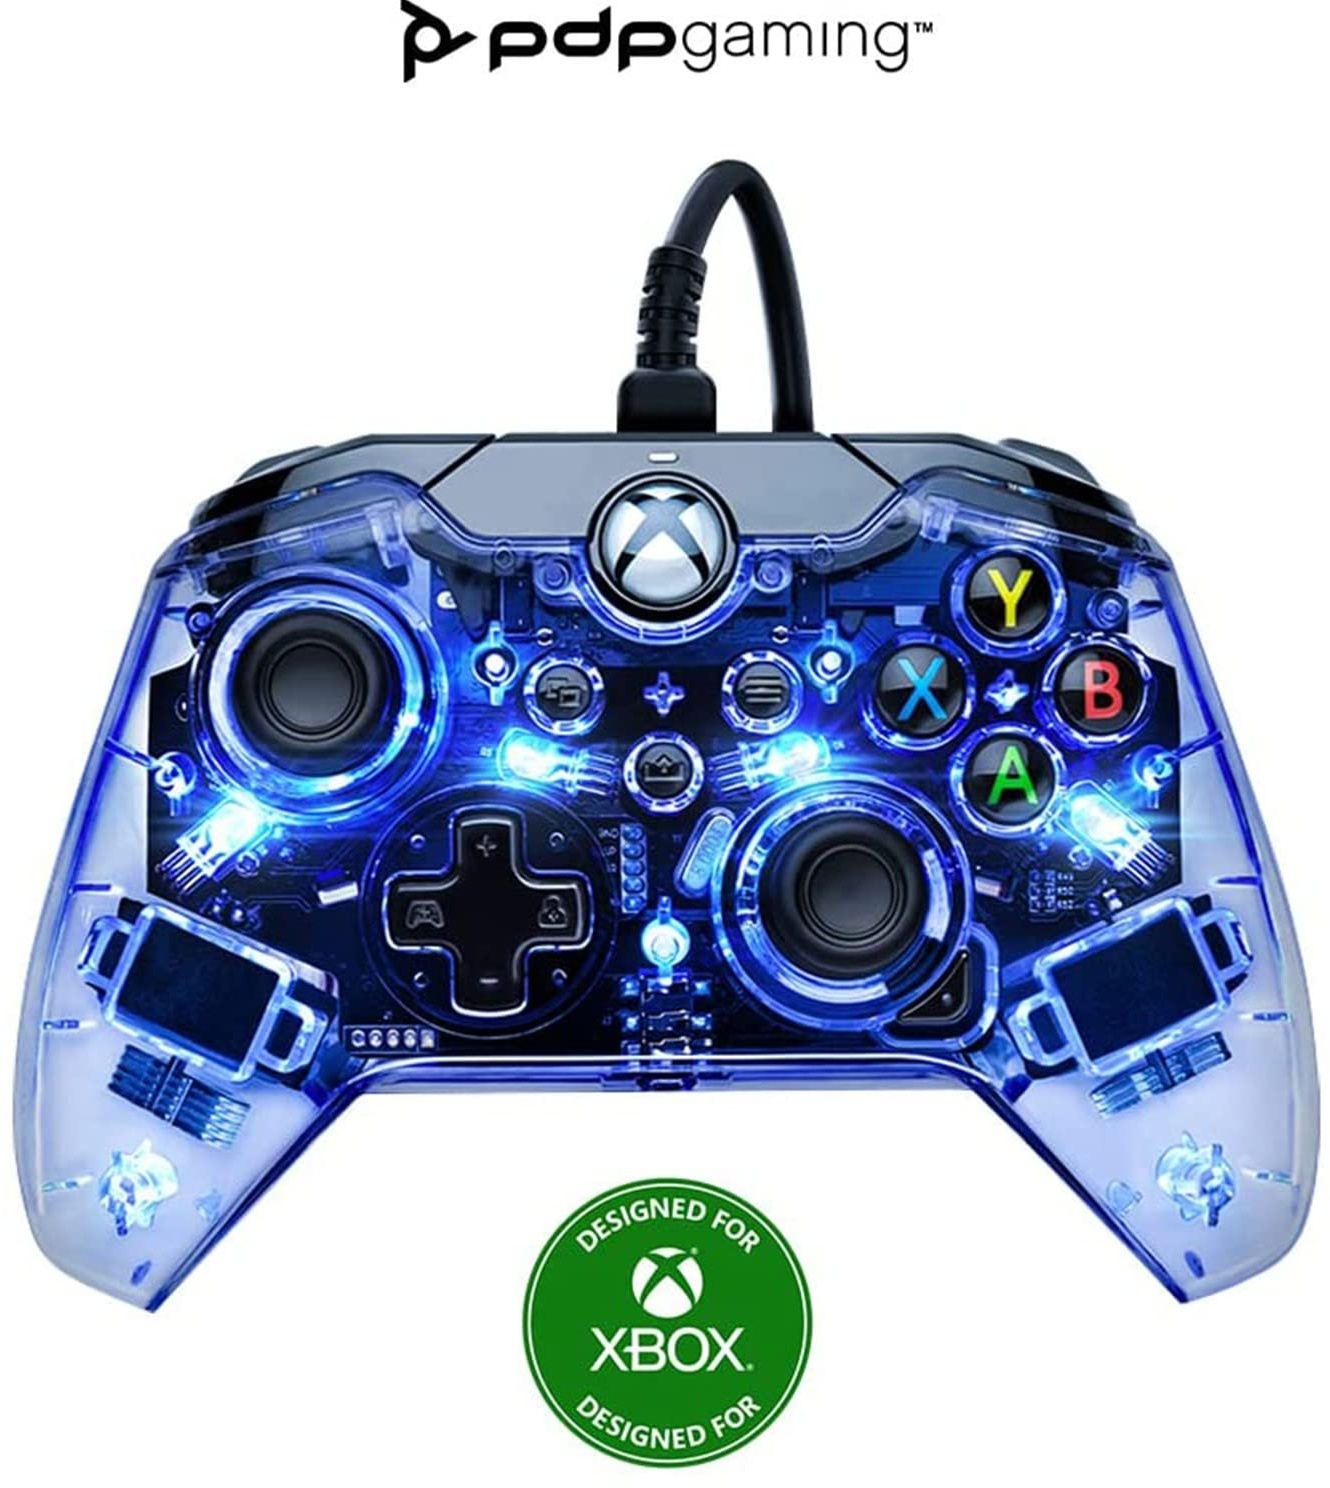 PDP Afterglow LED verkabelt Game Controller - RGB Hue Color Lights - USB Connector - Audio Controls - Dual Vibration Gamepad- Xbox Series X|S, Xbox One, PC